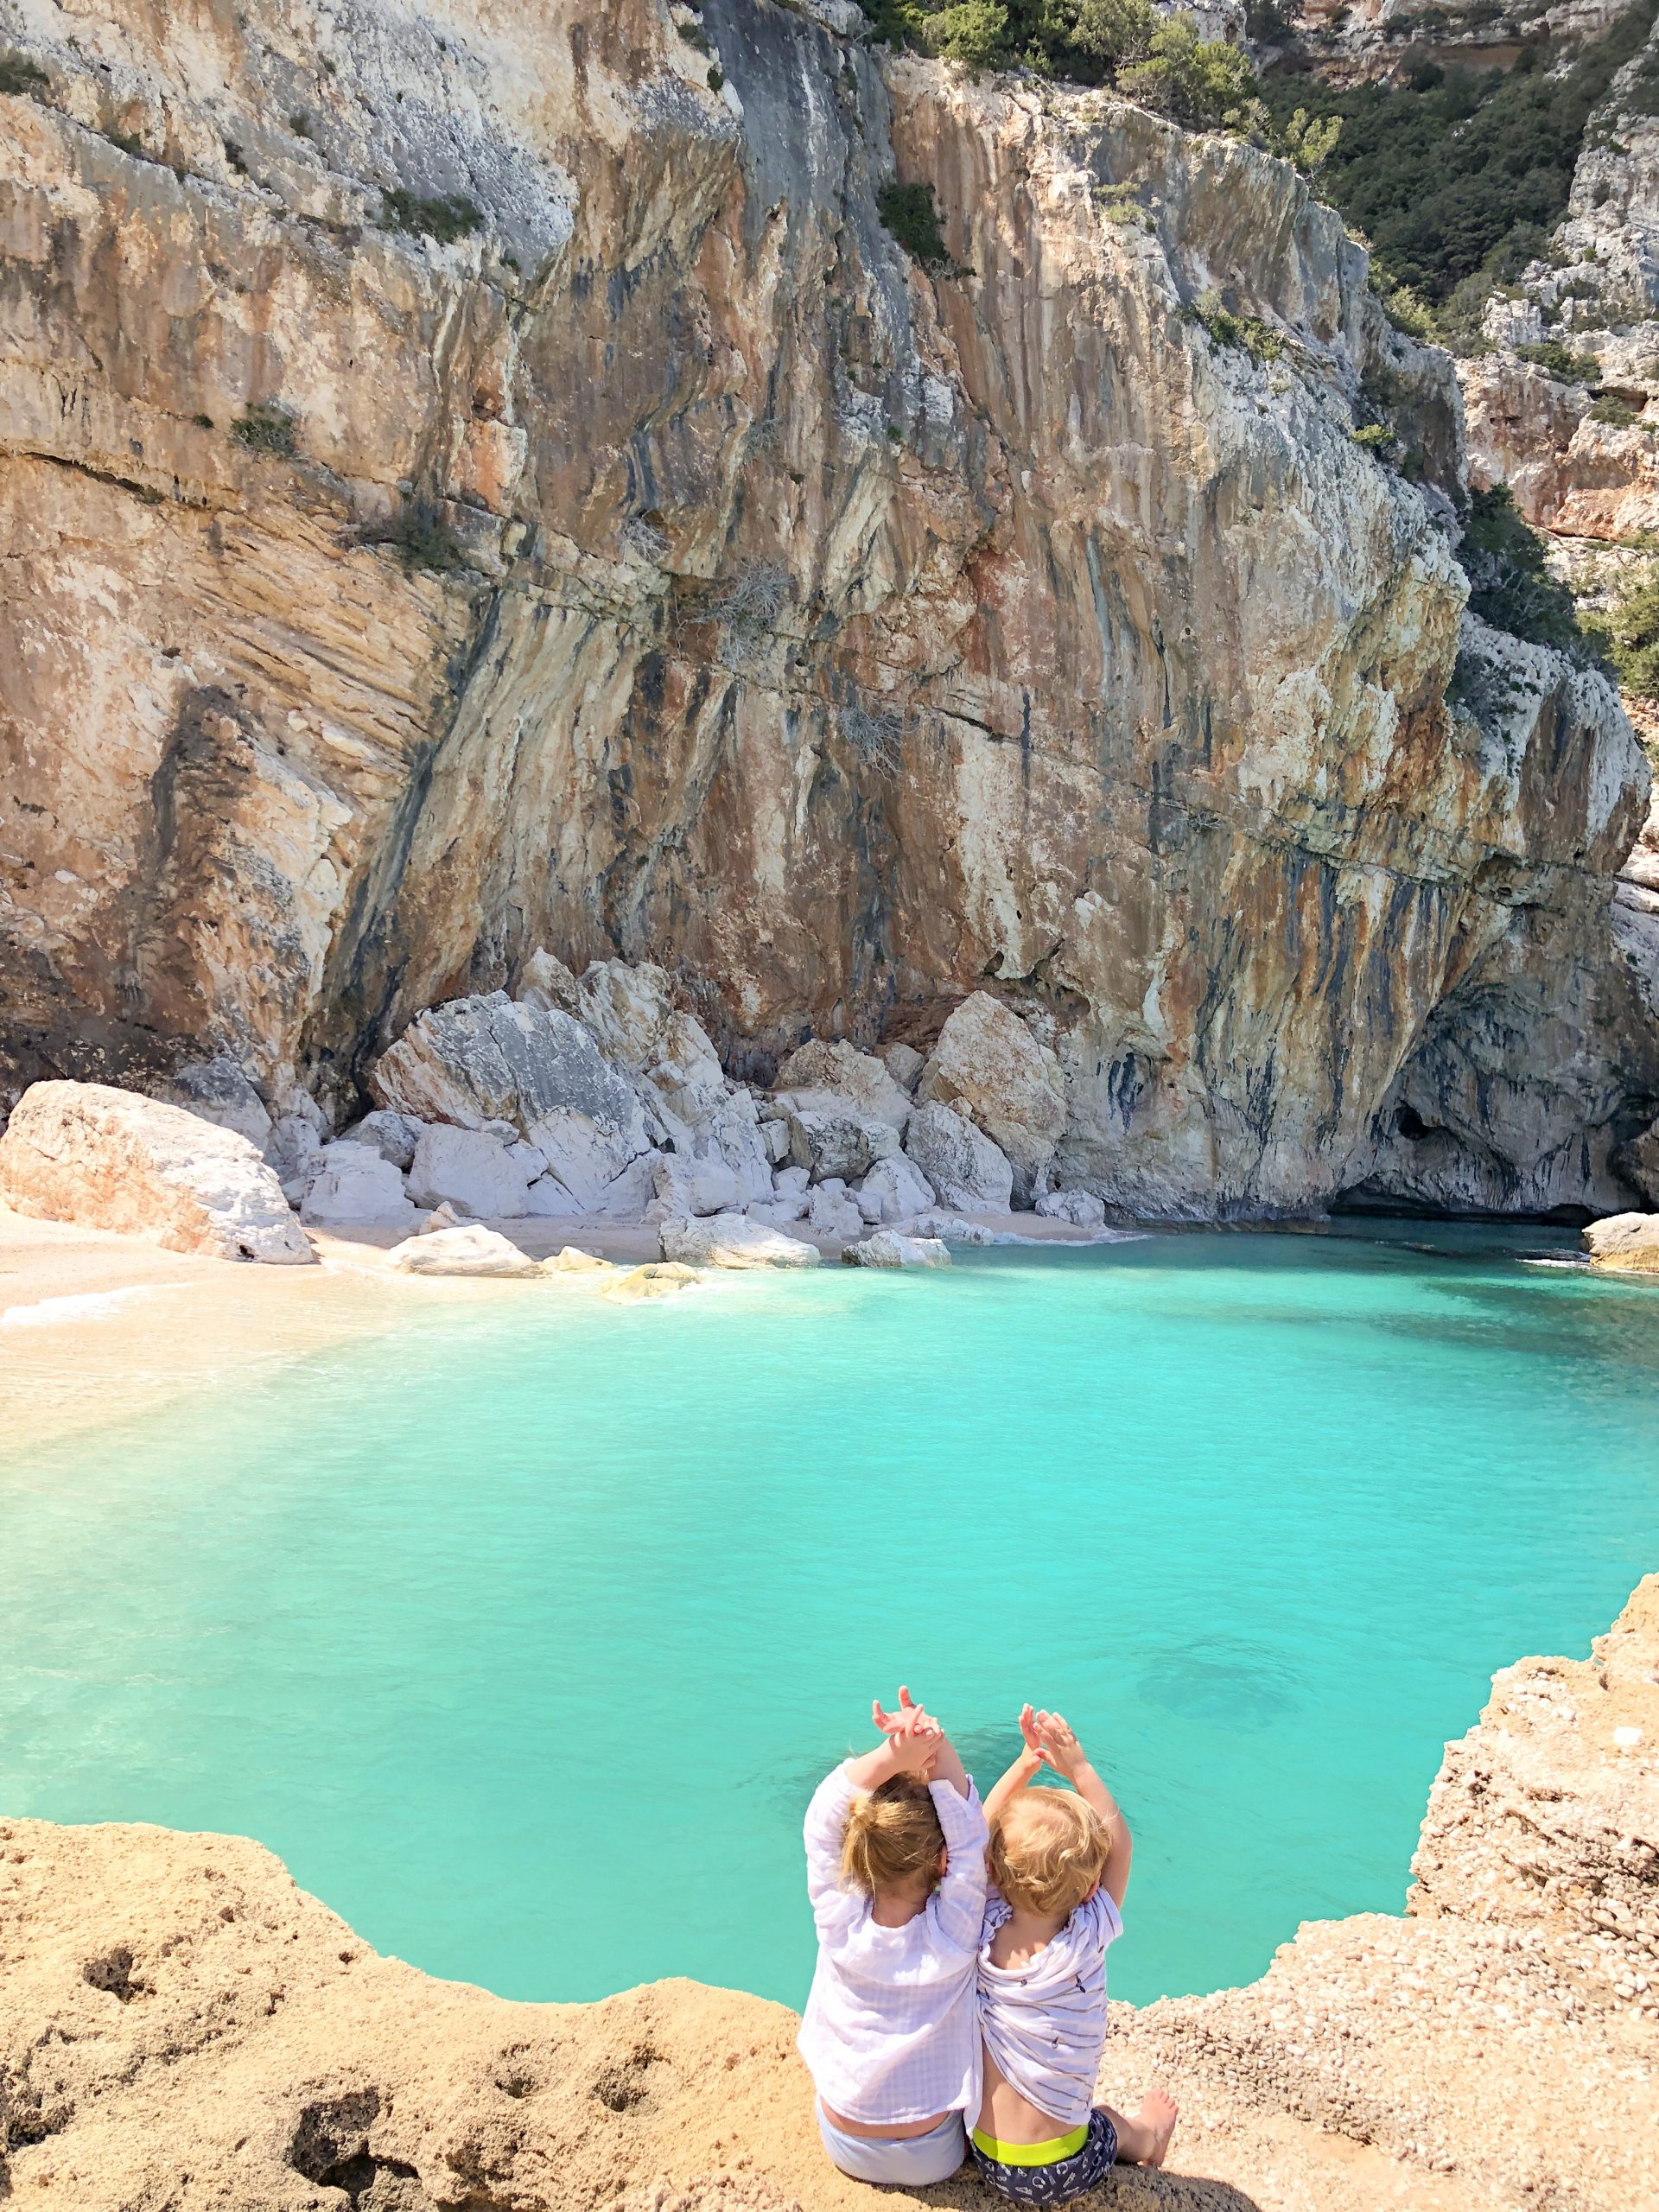 Sailing the Turquoise Waters: A Guide to Boat Tours in Sardinia